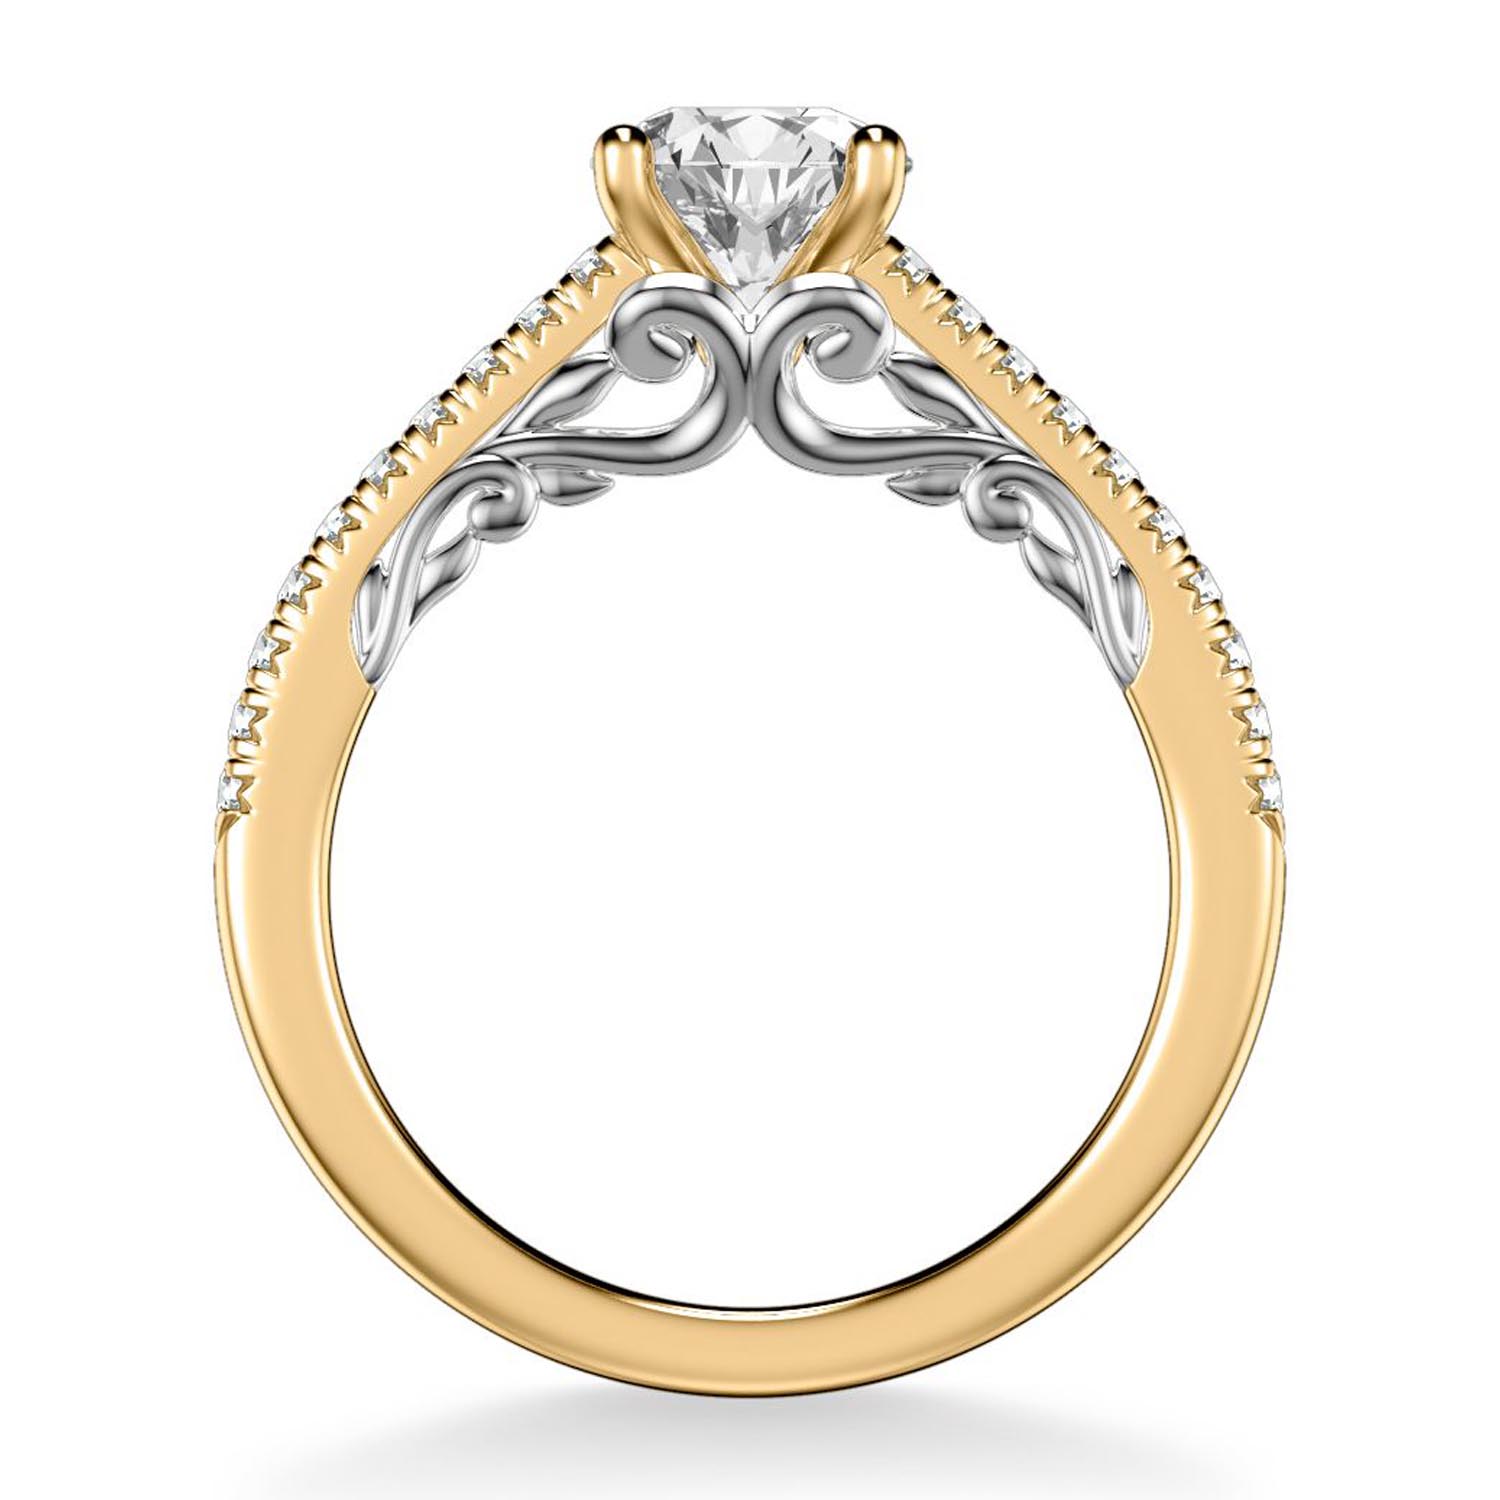 Artcarved Diamond Engagement Ring Setting in 14kt Yellow and White Gold (1/7ct tw)